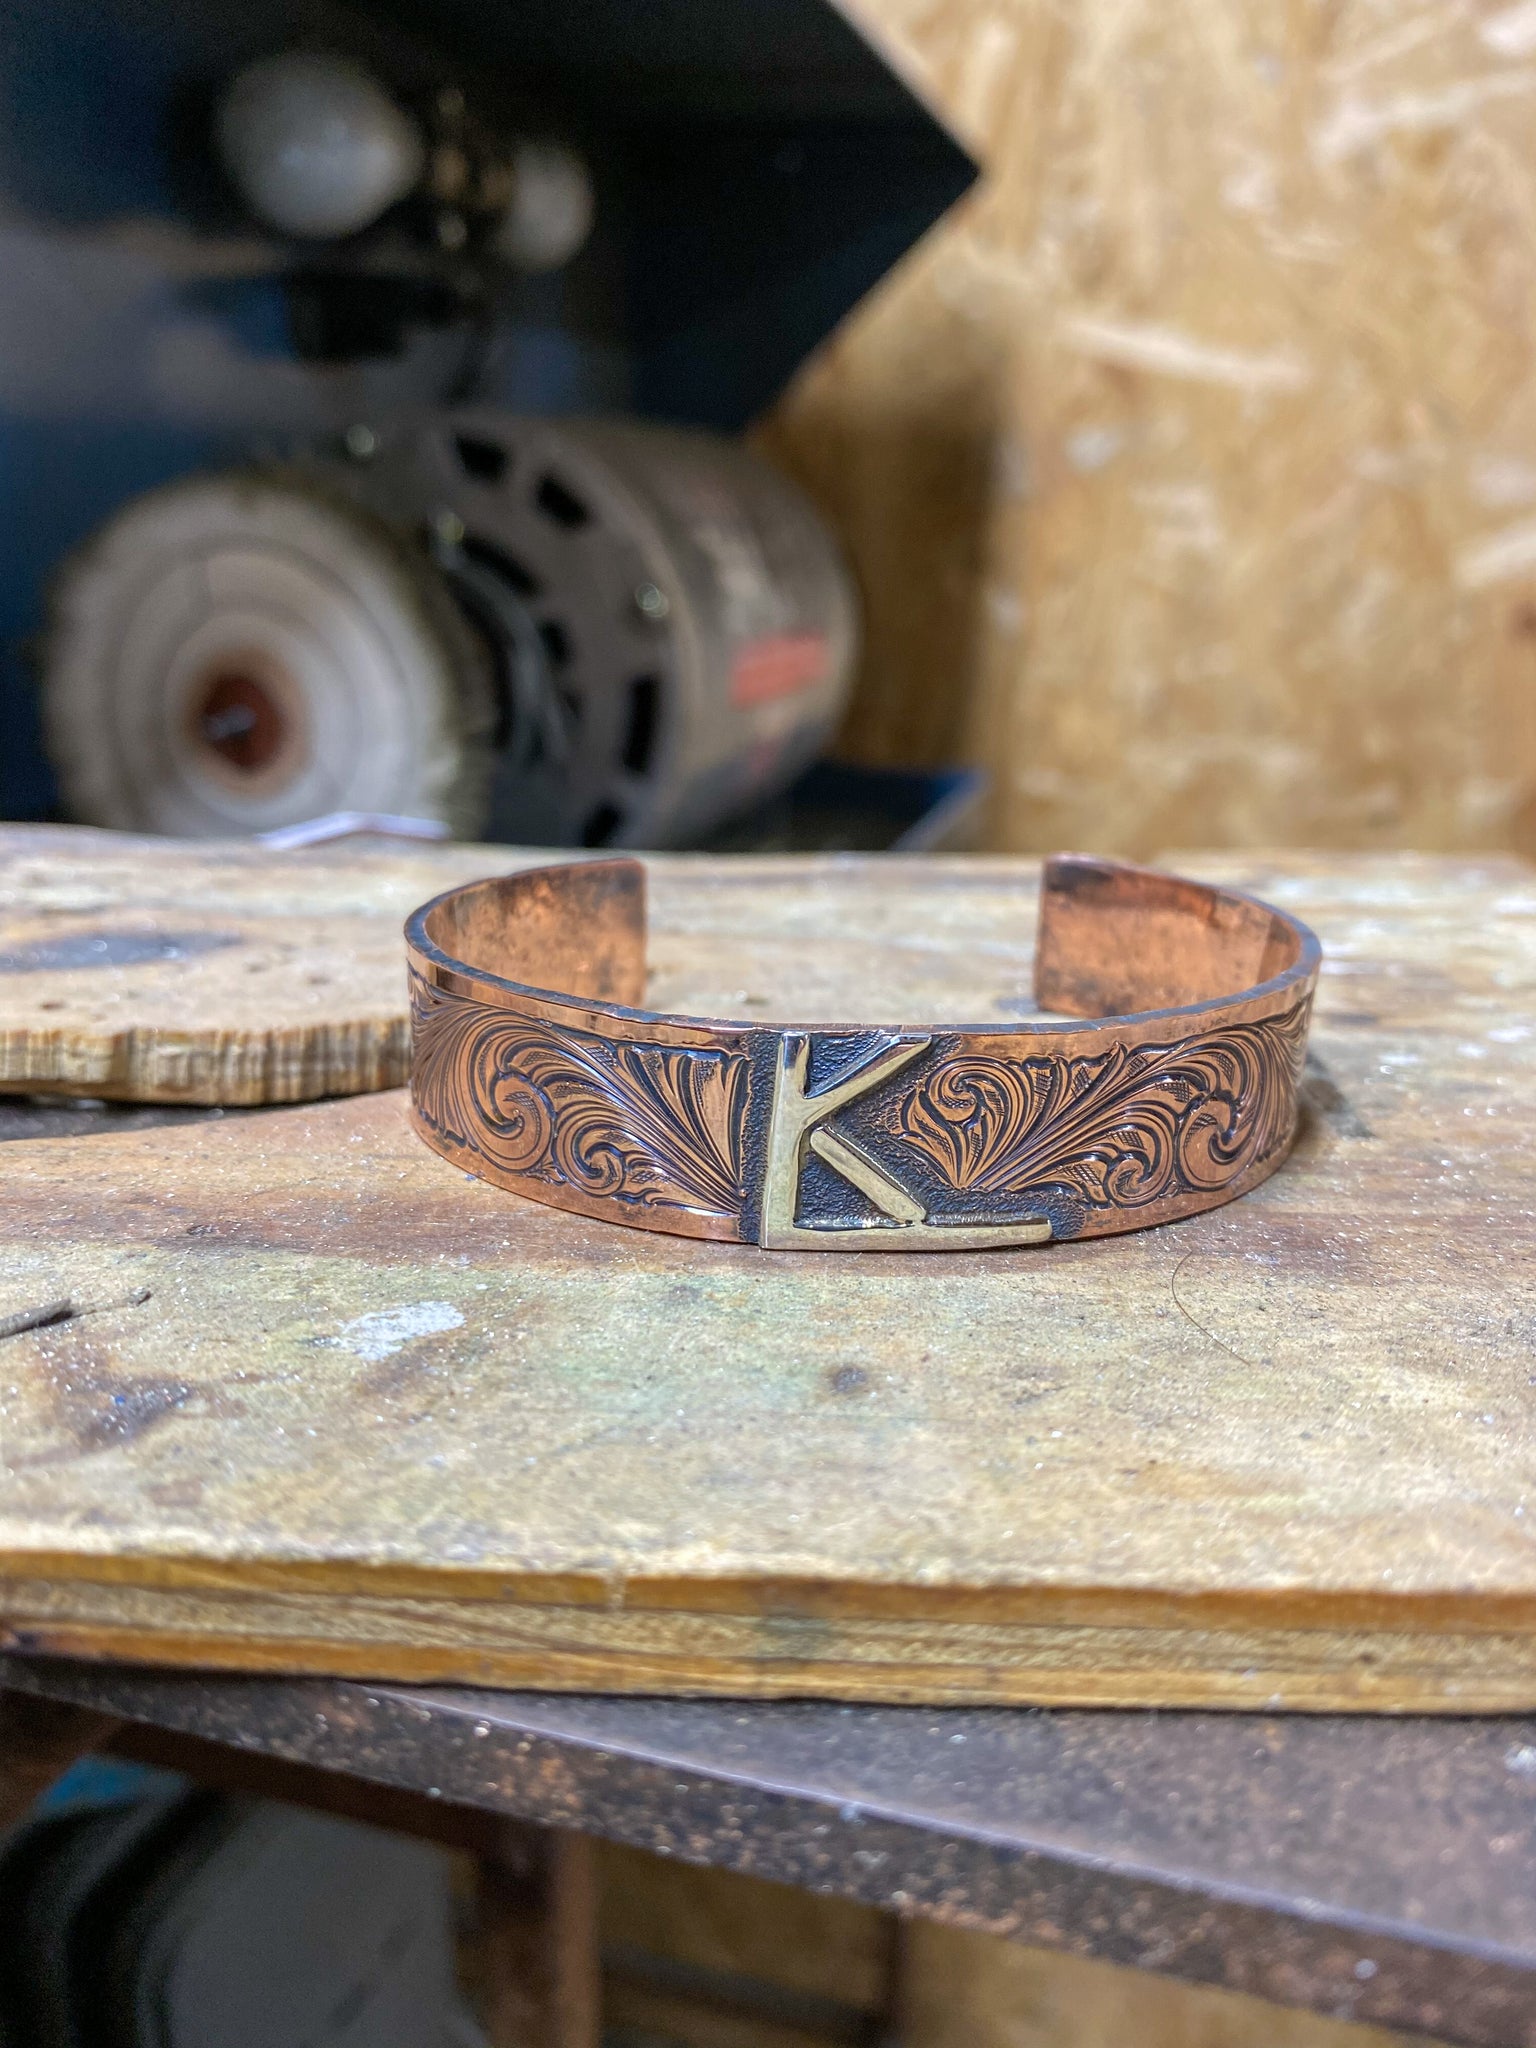 Amazon.com: IF - Personalized Cuff Bracelet for Men in Silver, Bronze,  Nickel, Gold, or Copper, Bangle Bracelet, Hand Stamped, Custom Cuff Bracelet,  Coordinate Bracelet, GPS Bracelet - Custom Gifts : Handmade Products